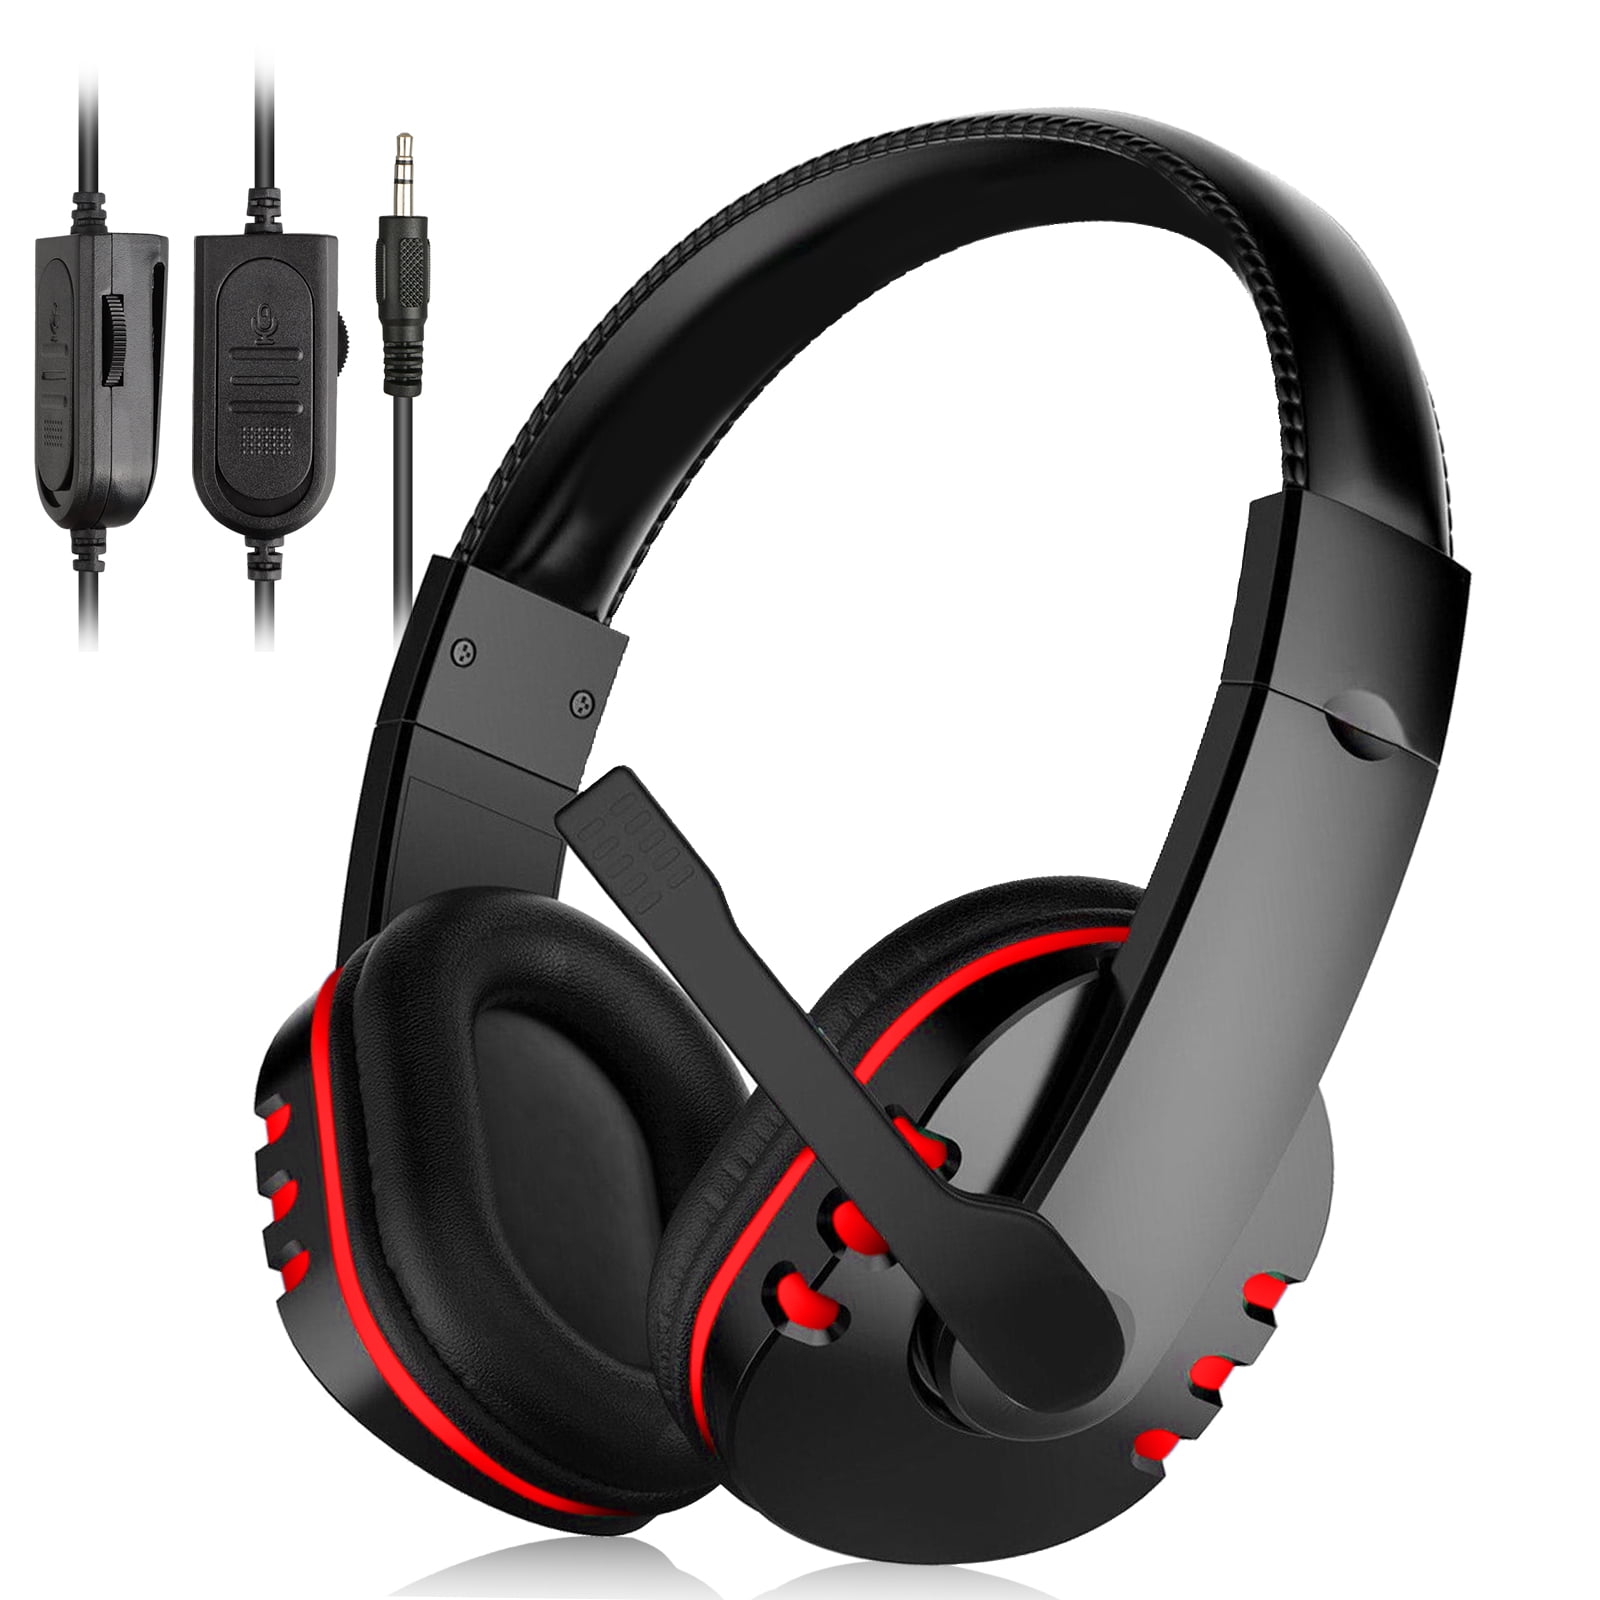 LED Lights & Soft Memory Earmuffs Black RED Pacrate Gaming Headset,Headset with 3.5mm Headphones with Noise Cancelling Microphone